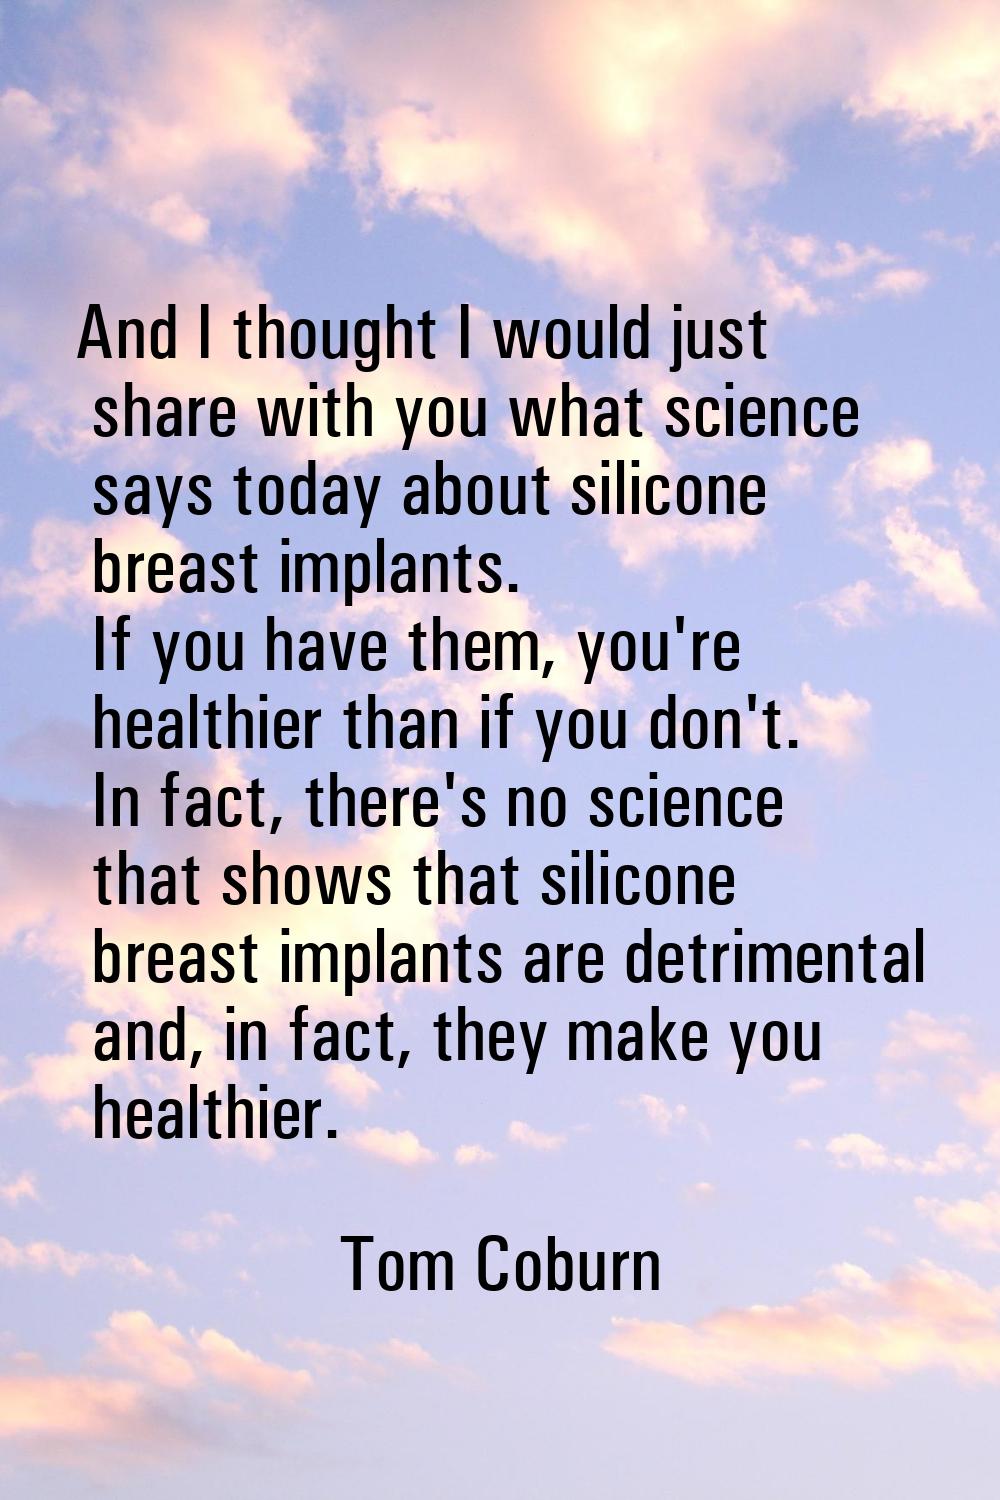 And I thought I would just share with you what science says today about silicone breast implants. I